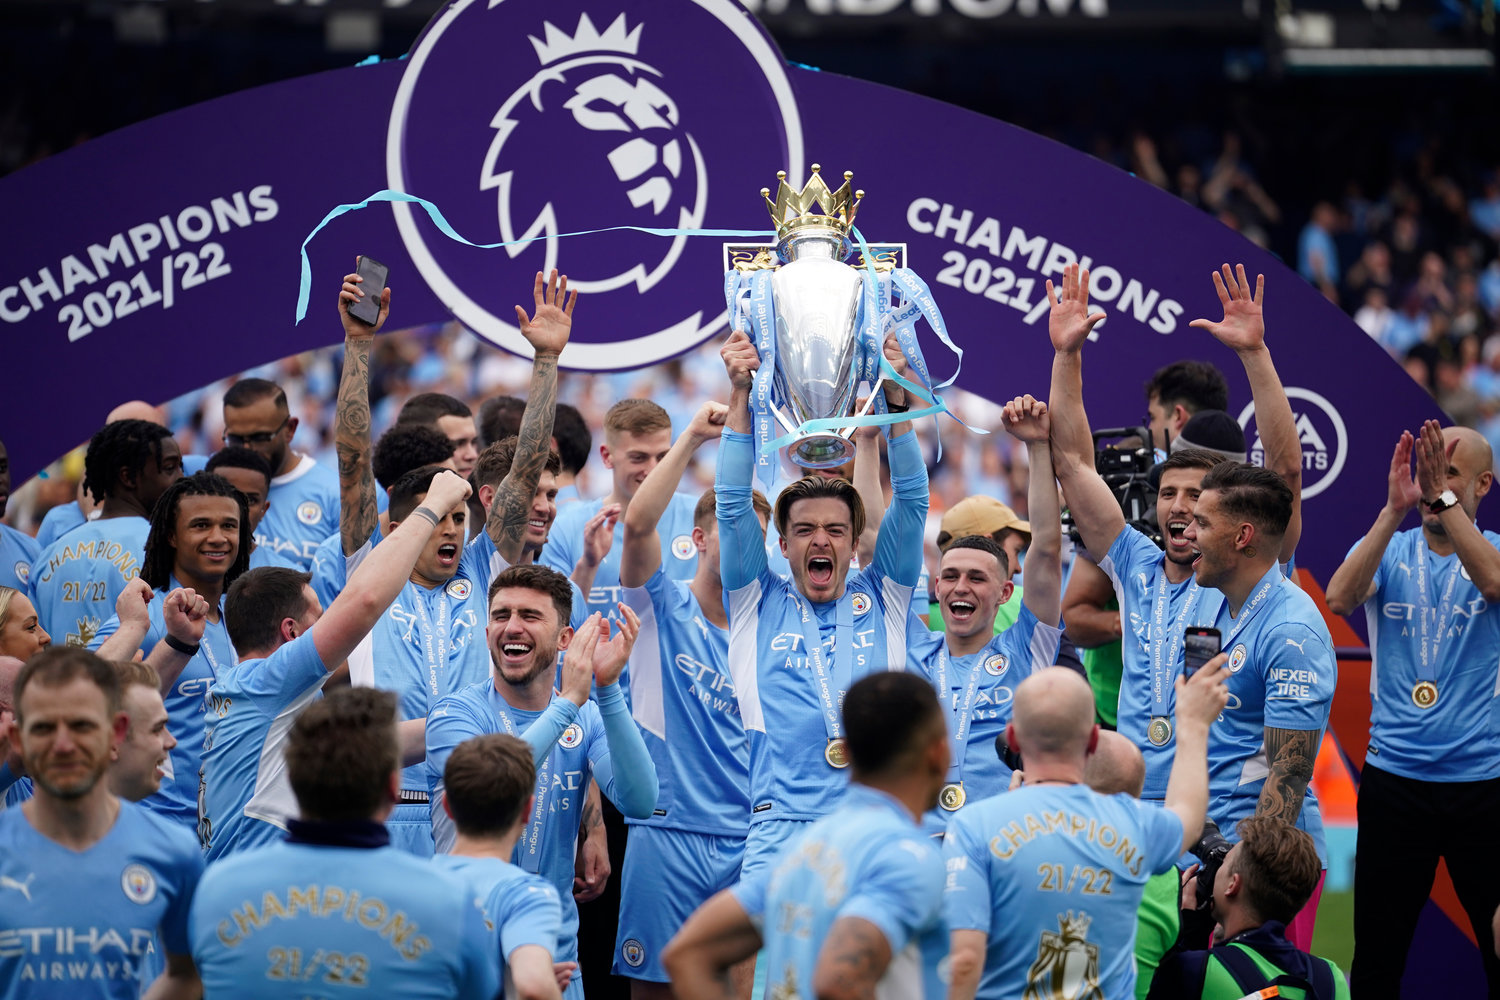 Manchester City players celebrate with trophy after winning the 2022 English Premier League title at the Etihad Stadium in Manchester, England, on May 22. NBC celebrates a milestone this weekend when it begins its 10th season of covering the Premier League.